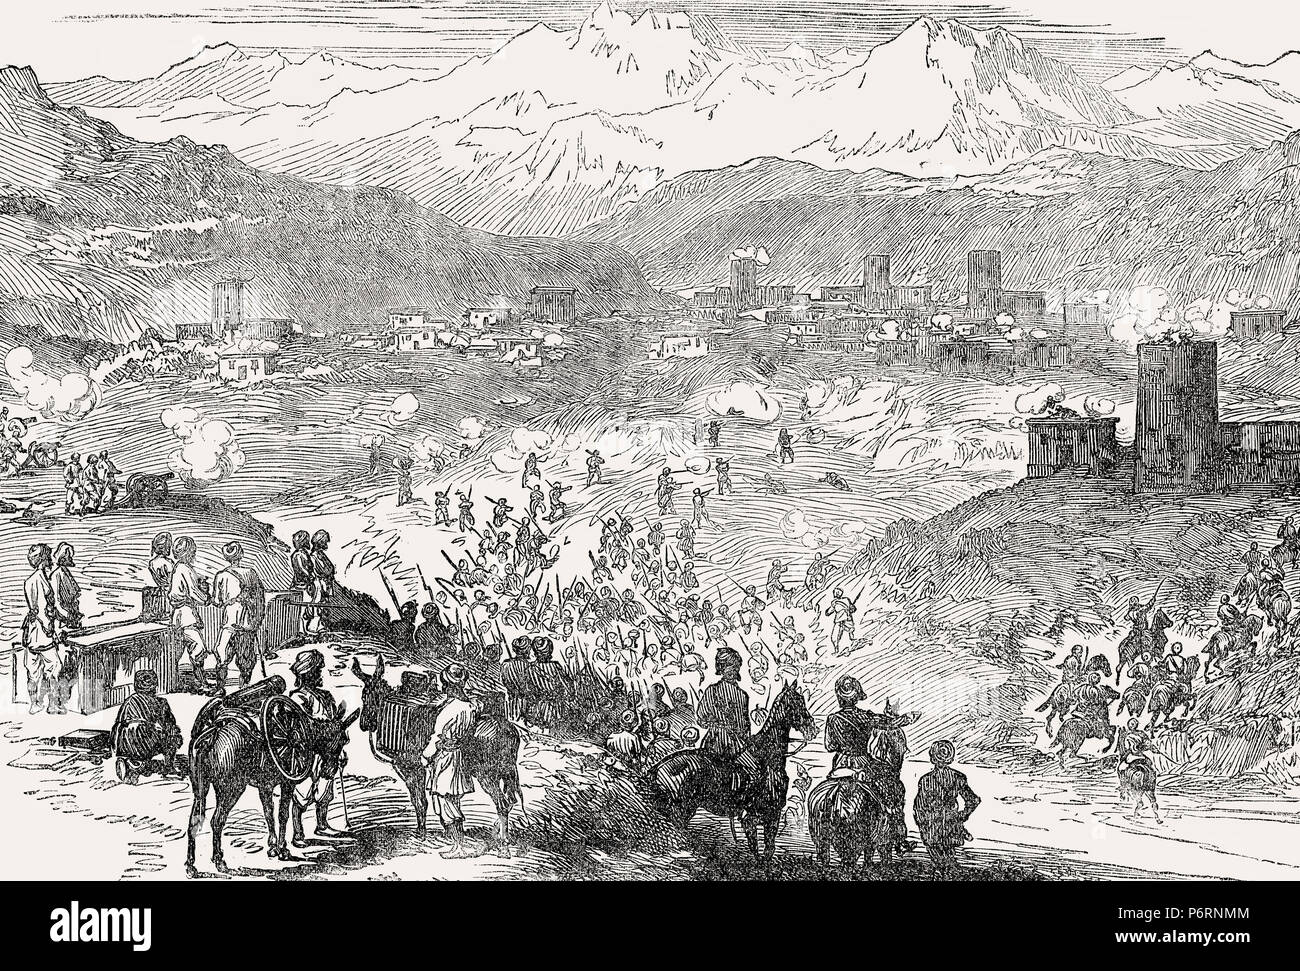 Attack on a town, scene from Anglo-Zulu War, 1879, From British Battles on Land and Sea, by James Grant Stock Photo